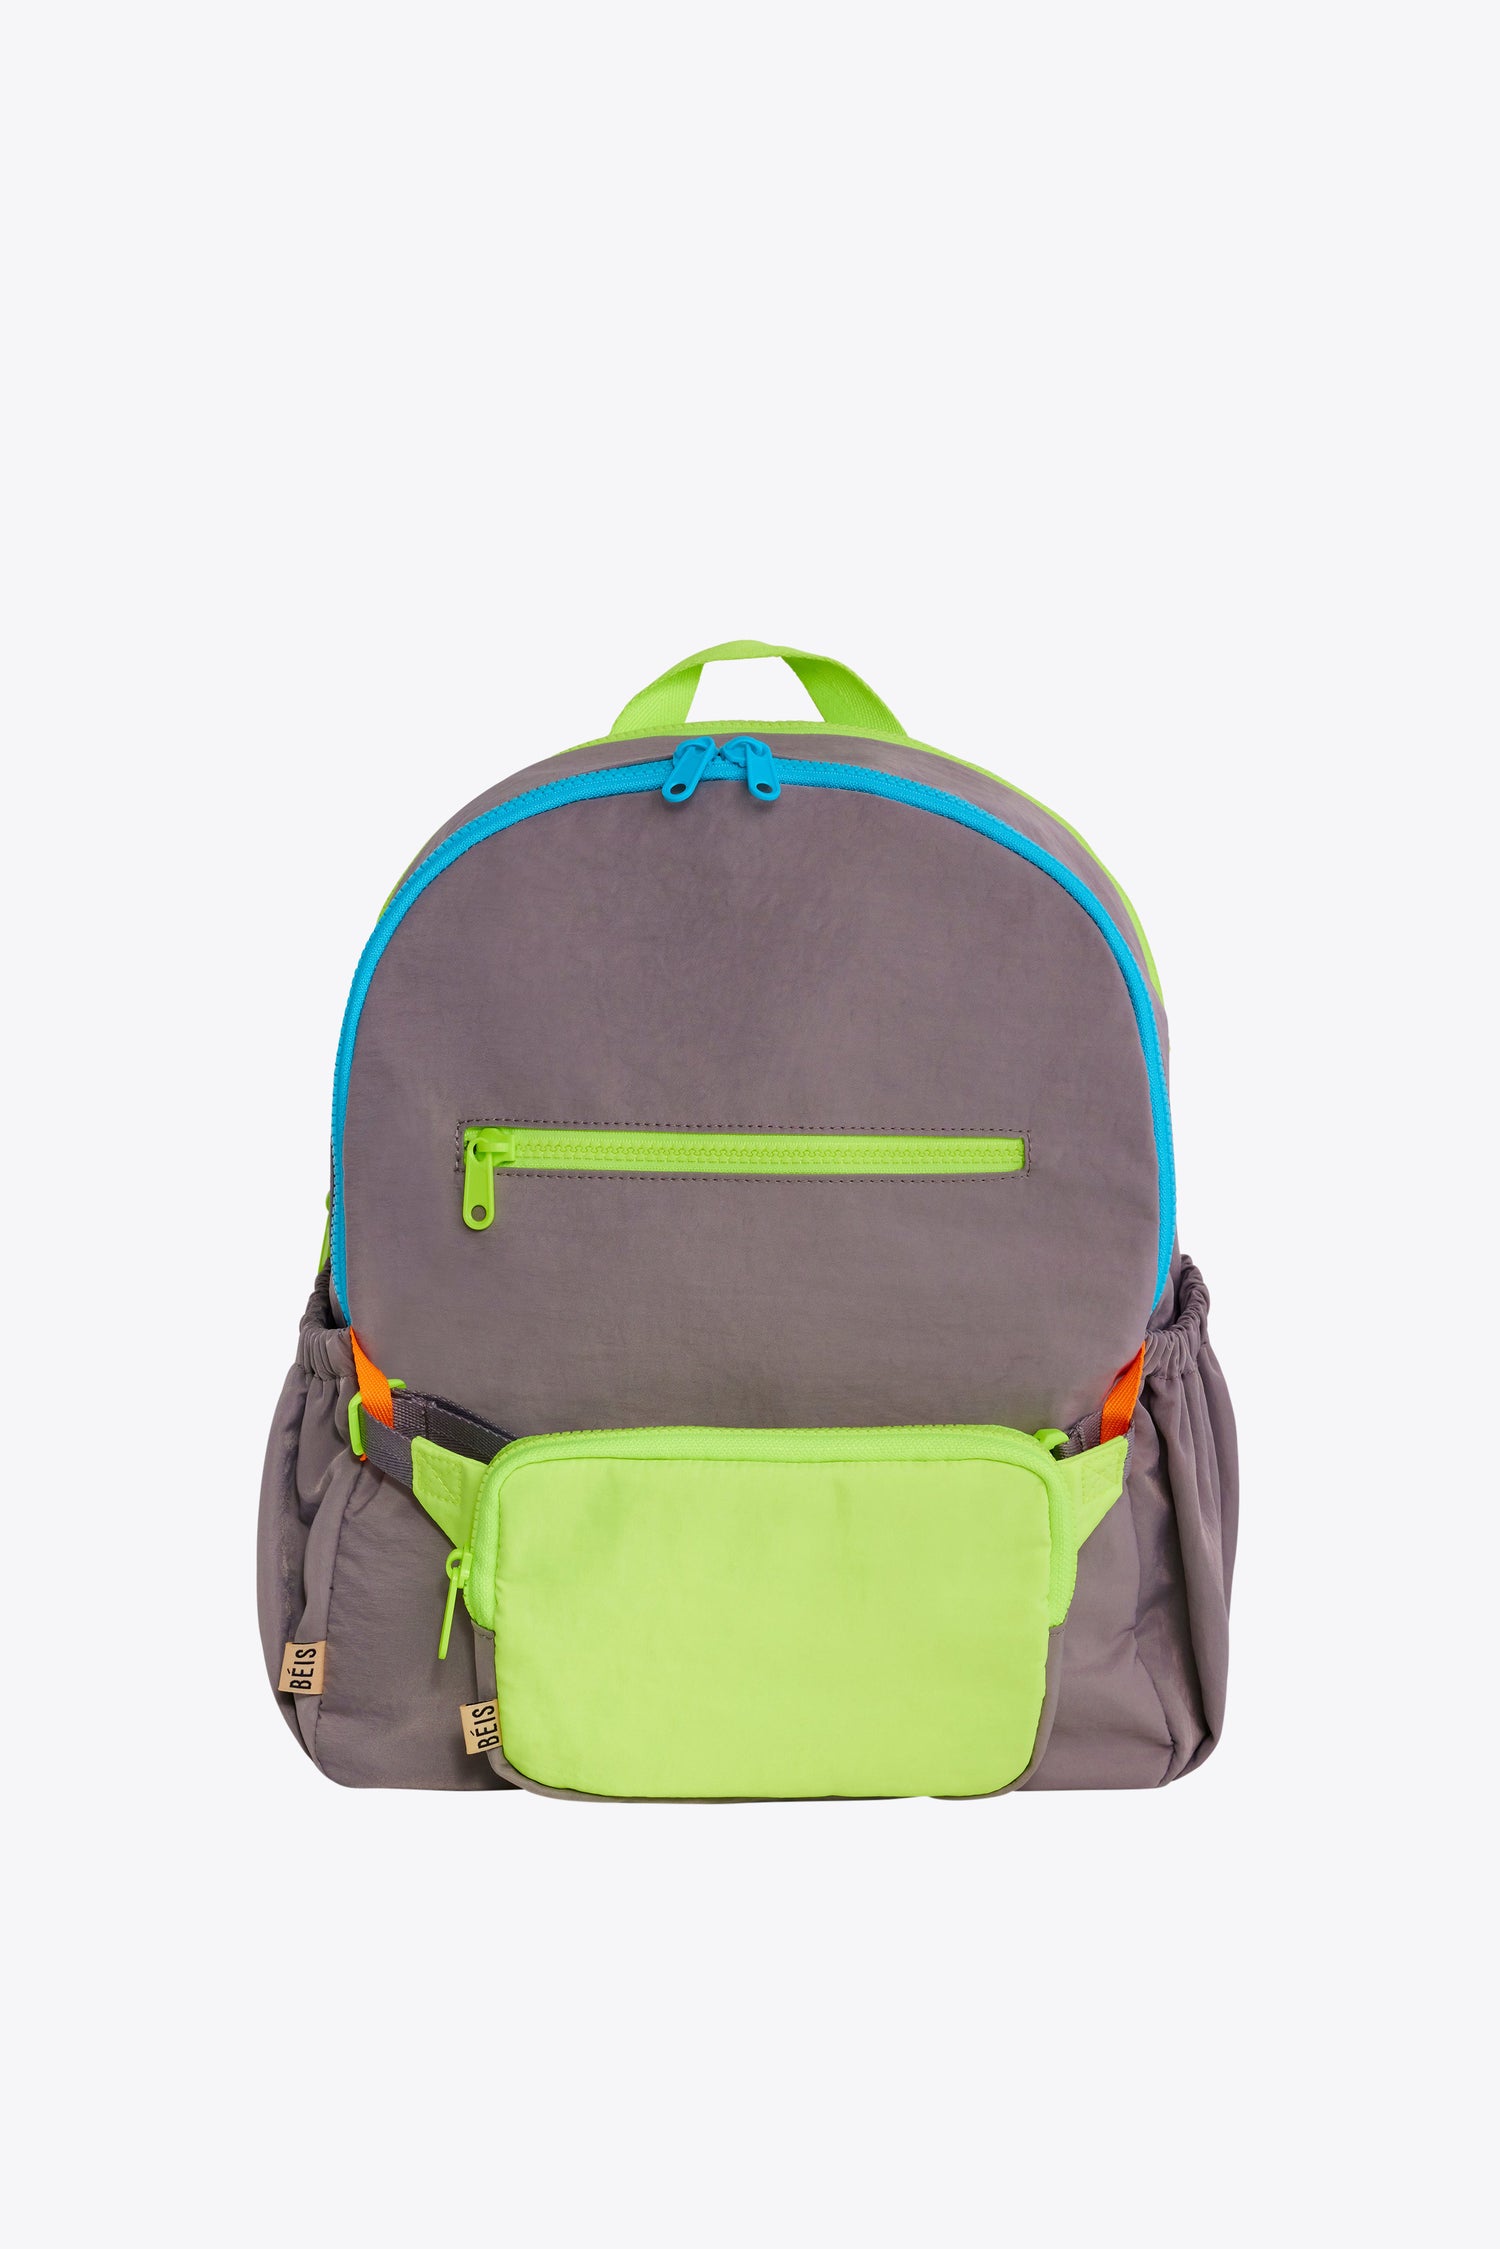 The Kids Backpack Colors